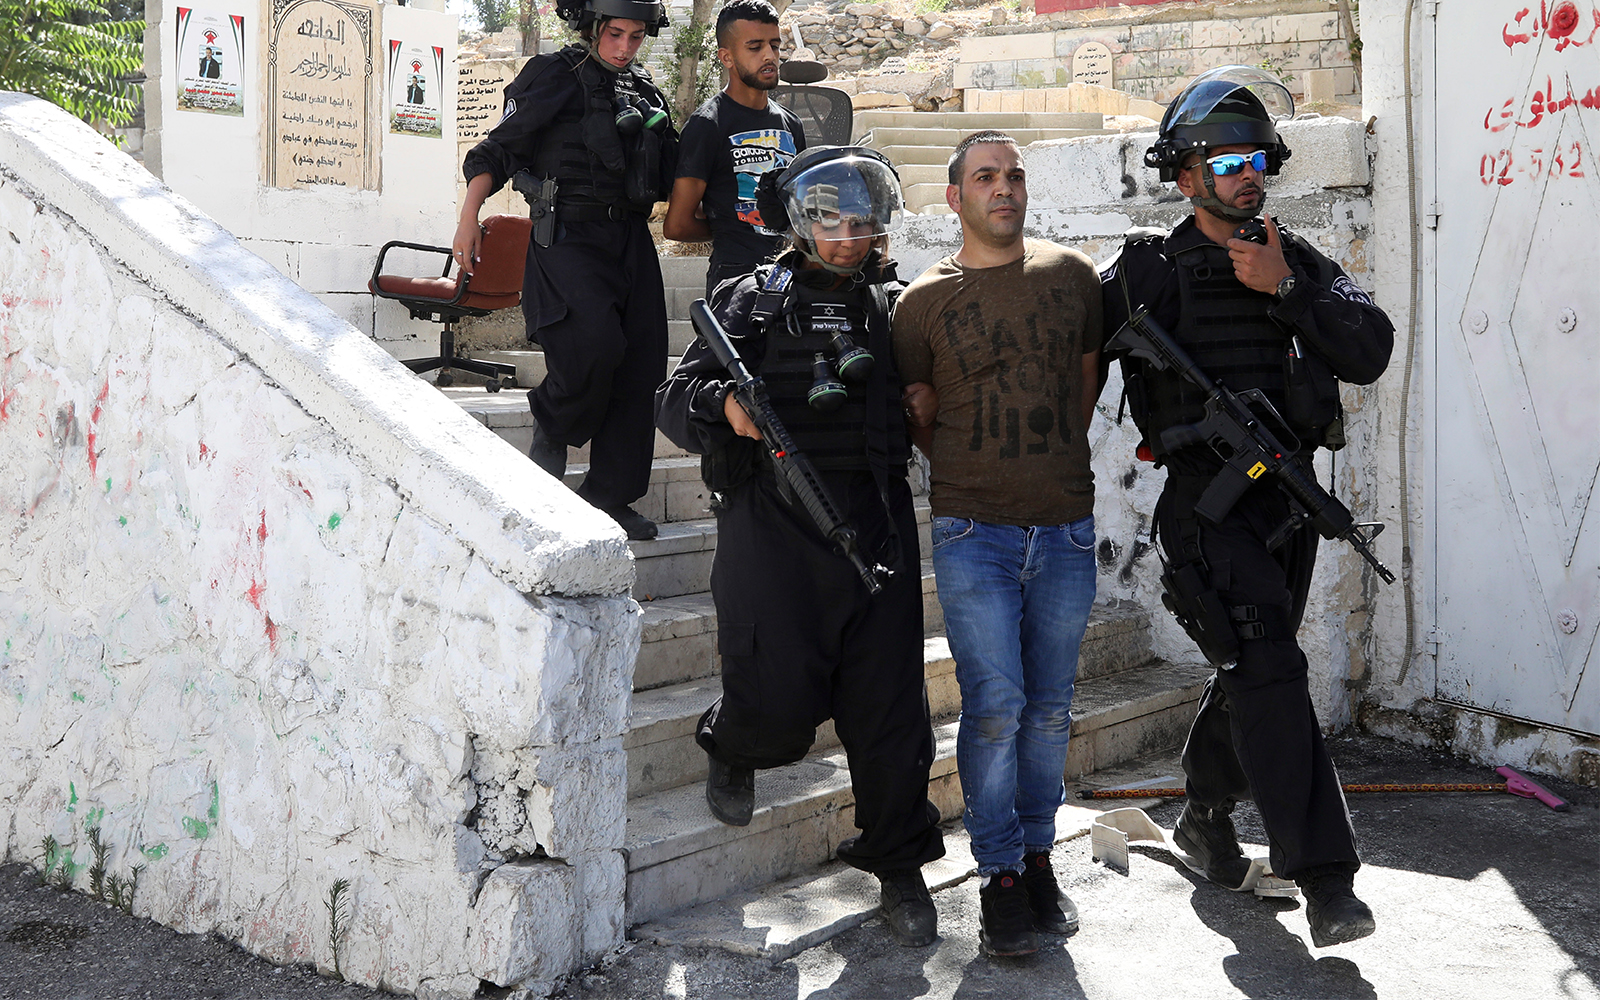 Palestinians are arrested during clashes with Israeli police in Jerusalem's neighborhood of Issawiya, June 28, 2019, a day after a Palestinian was shot and killed by police during a protest in the same neighborhood. (AP Photo/Mahmoud Illean)